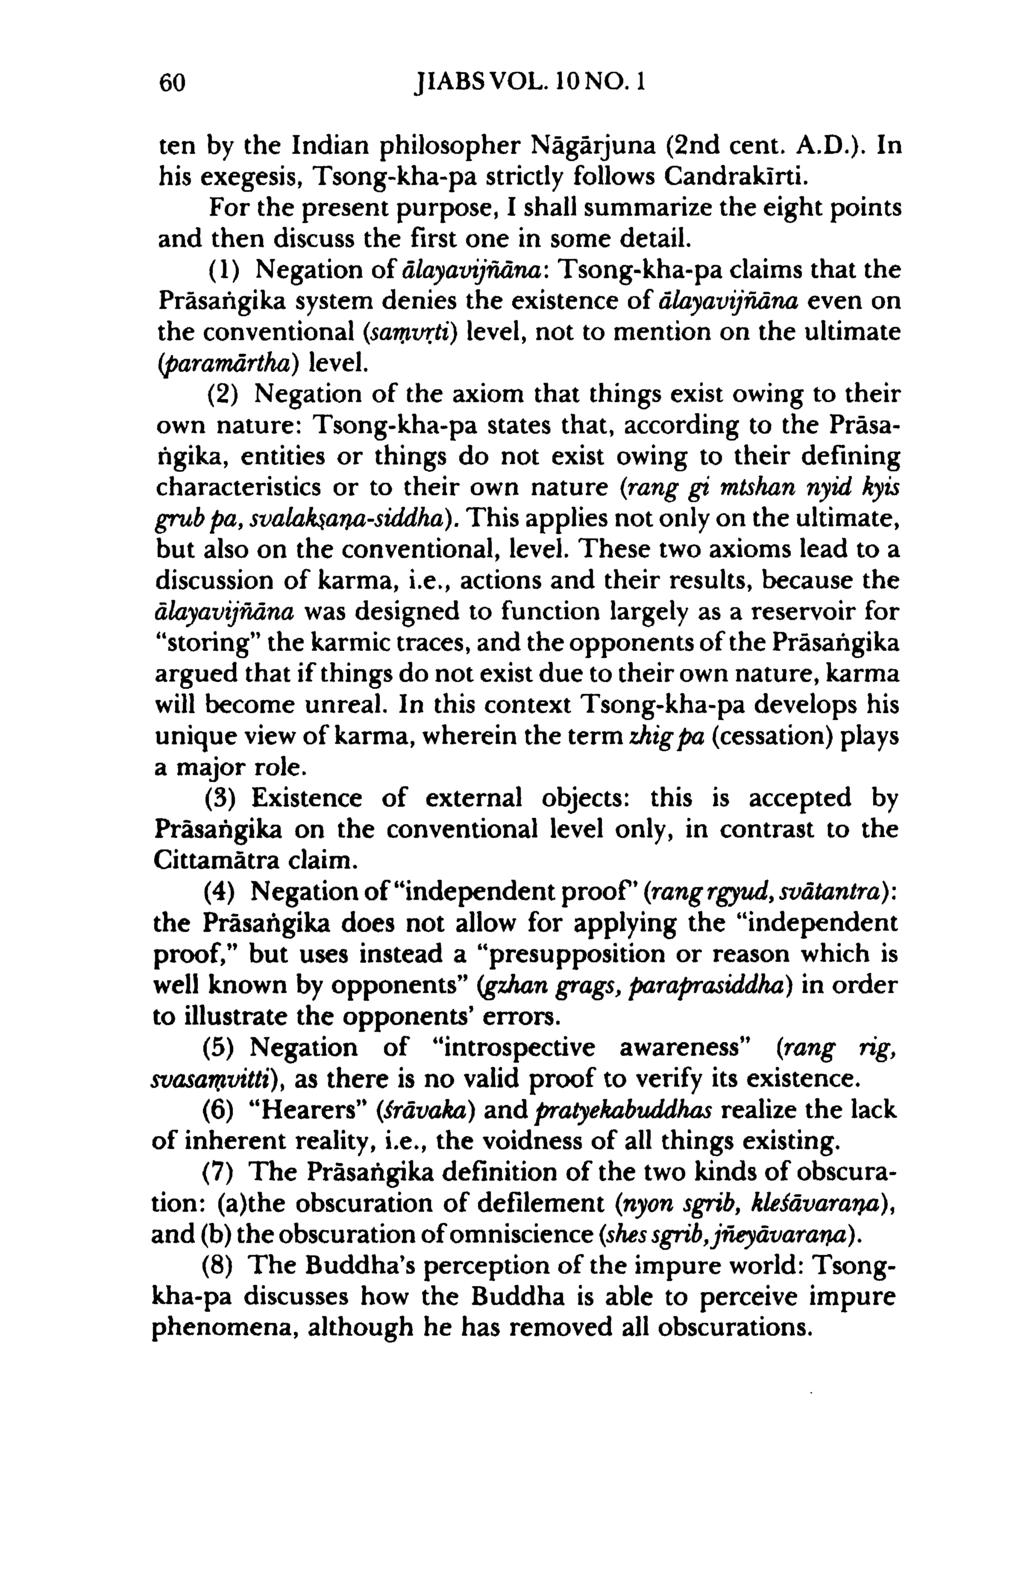 60 JIABSVOL. 10 NO. 1 ten by the Indian philosopher Nagarjuna (2nd cent. A.D.). In his exegesis, Tsong-kha-pa strictly follows Candrakirti.